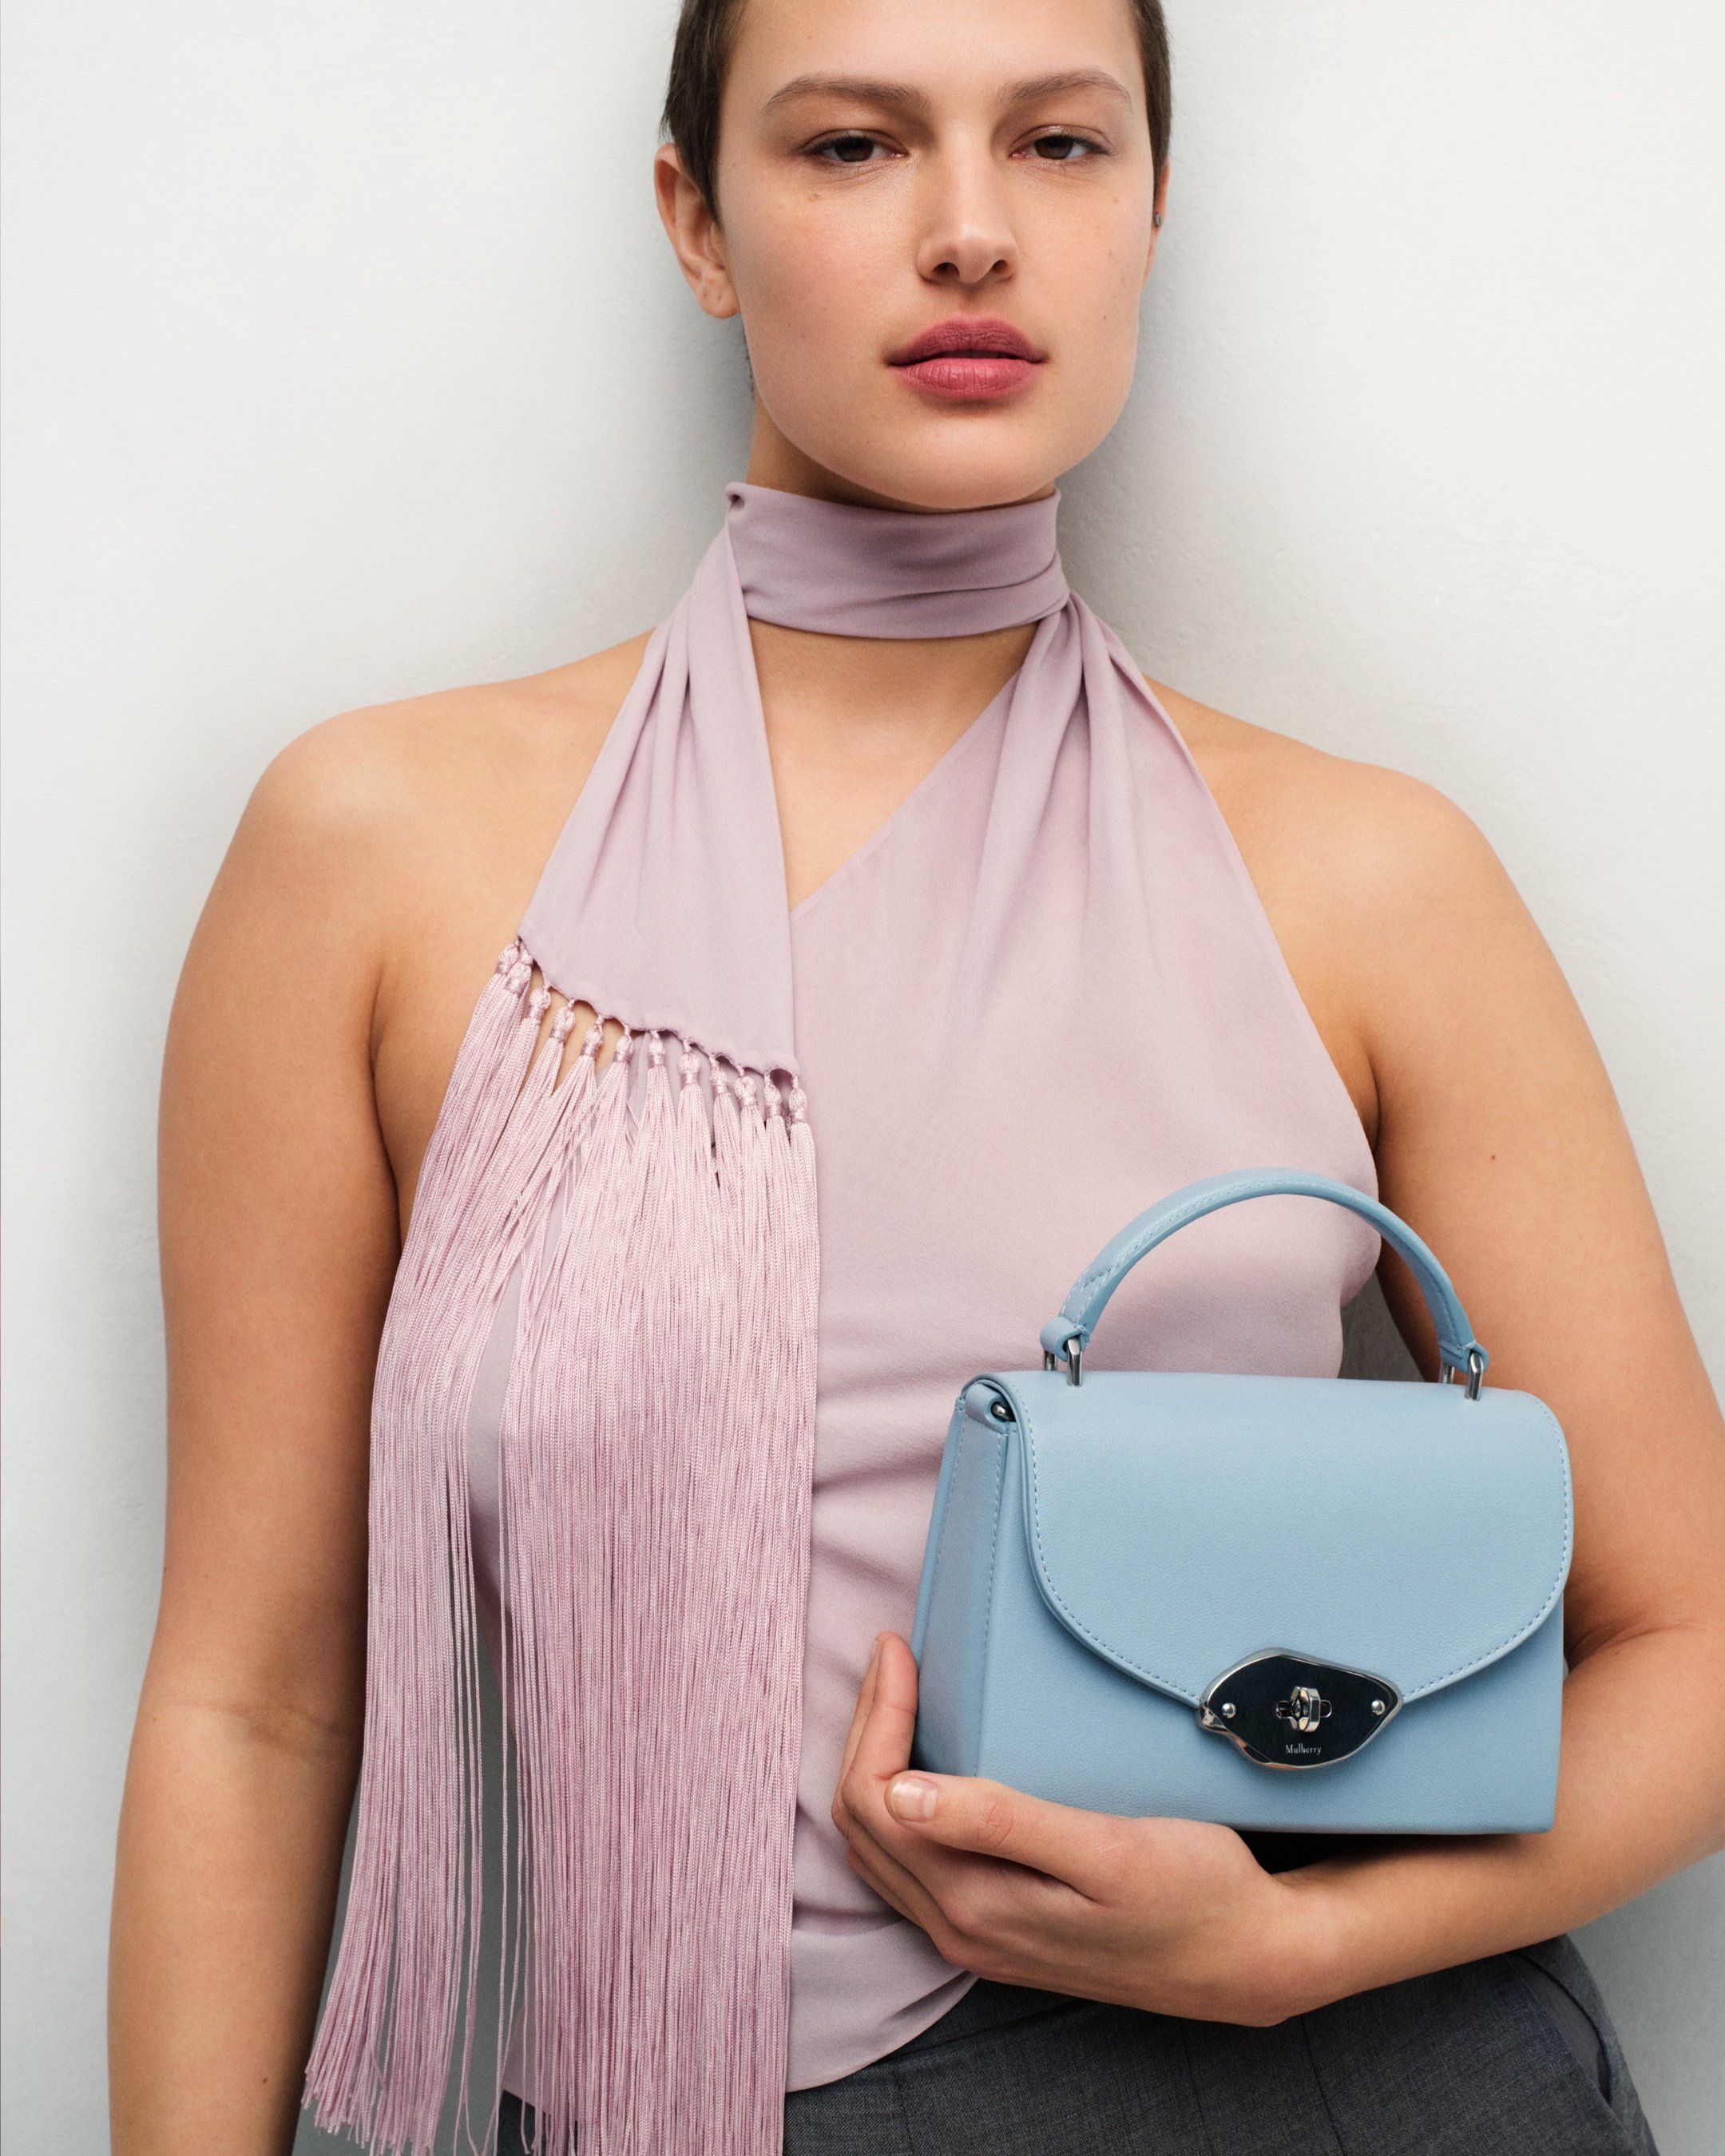 Model holding the Small Lana bag in blue leather